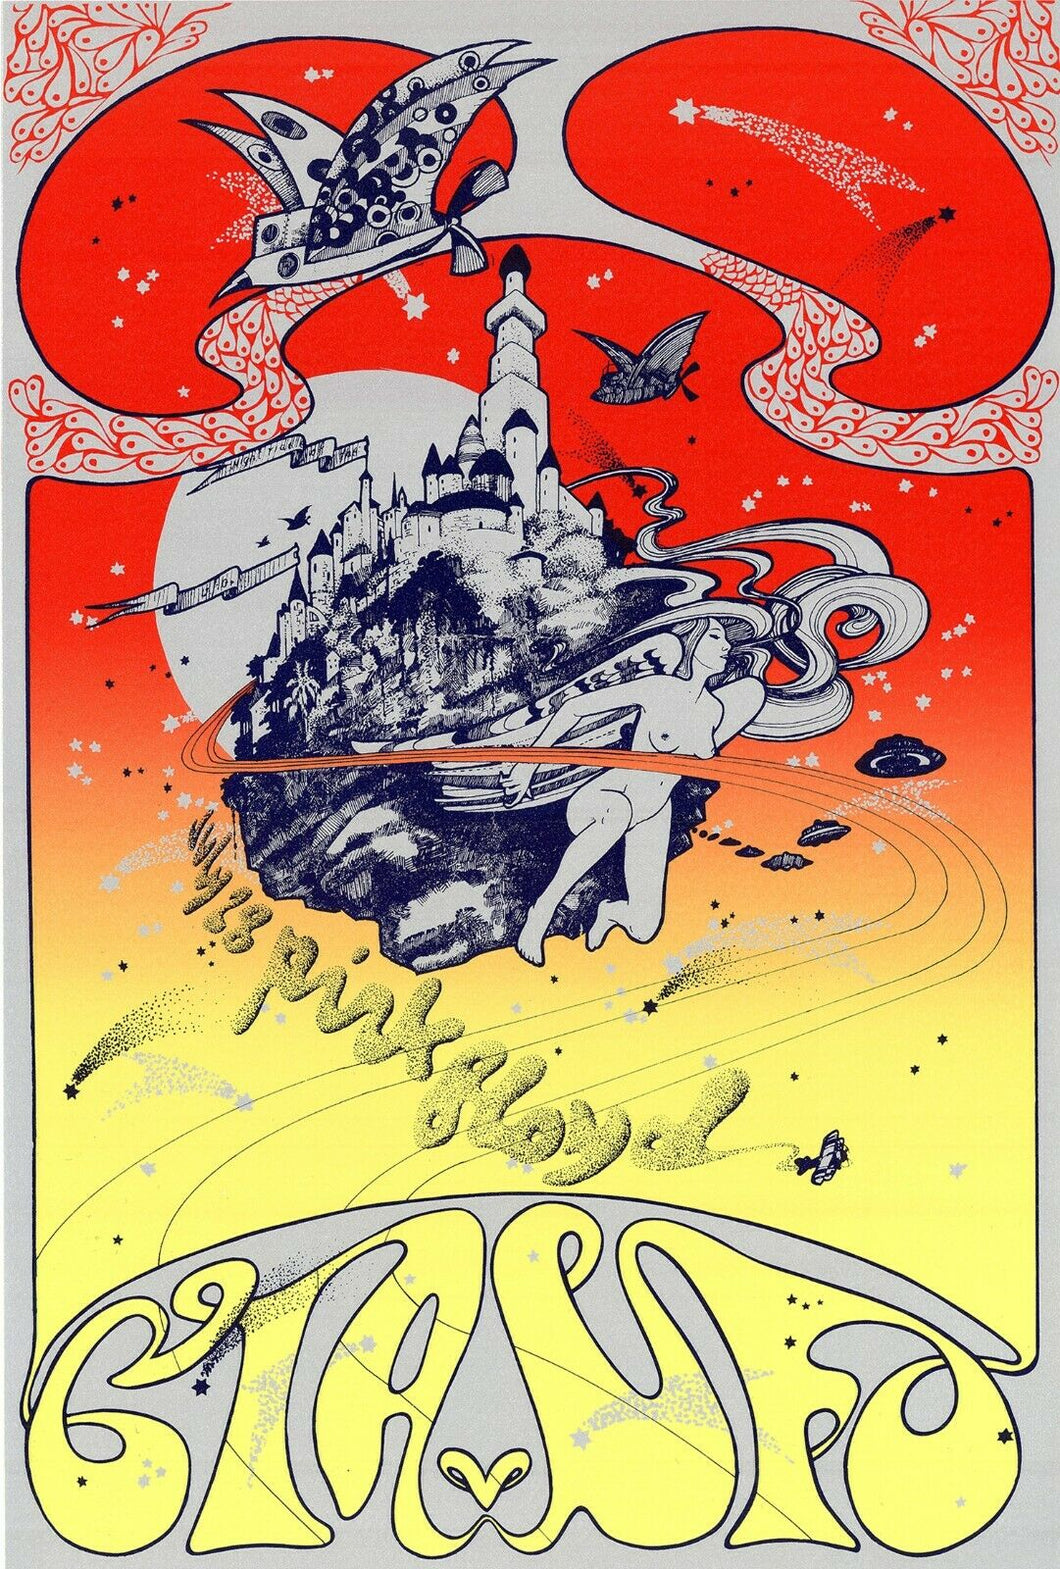 PINK FLOYD poster HAPSHASH OFFICIAL print UFO club 67 Signed by Nigel Waymouth - Original Music and Movie Posters for sale from Bamalama - Online Poster Store UK London